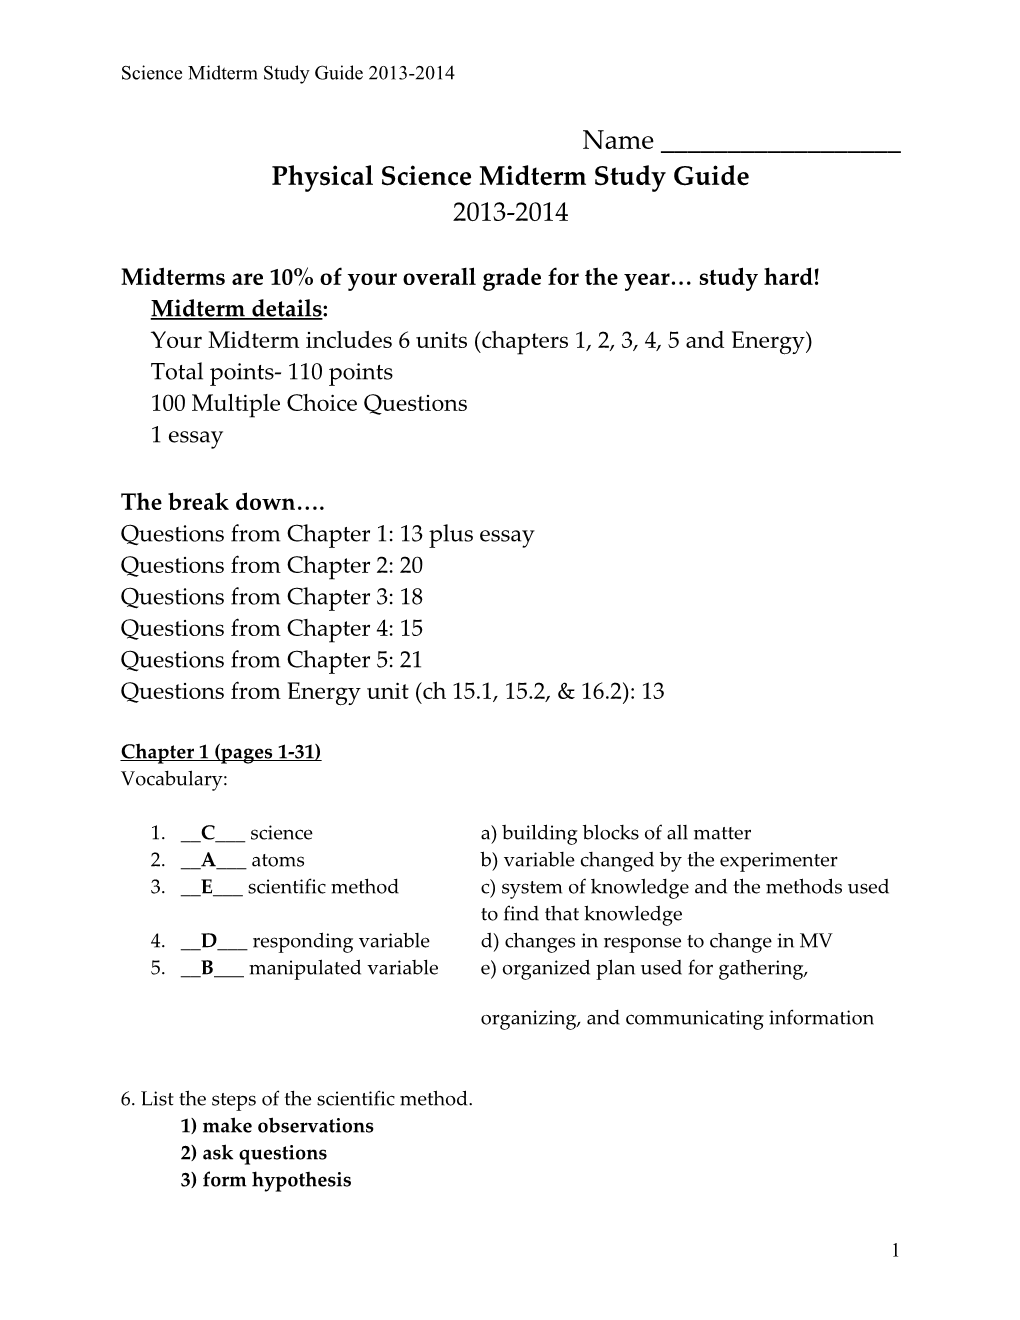 Physical Science Midterm Study Guide